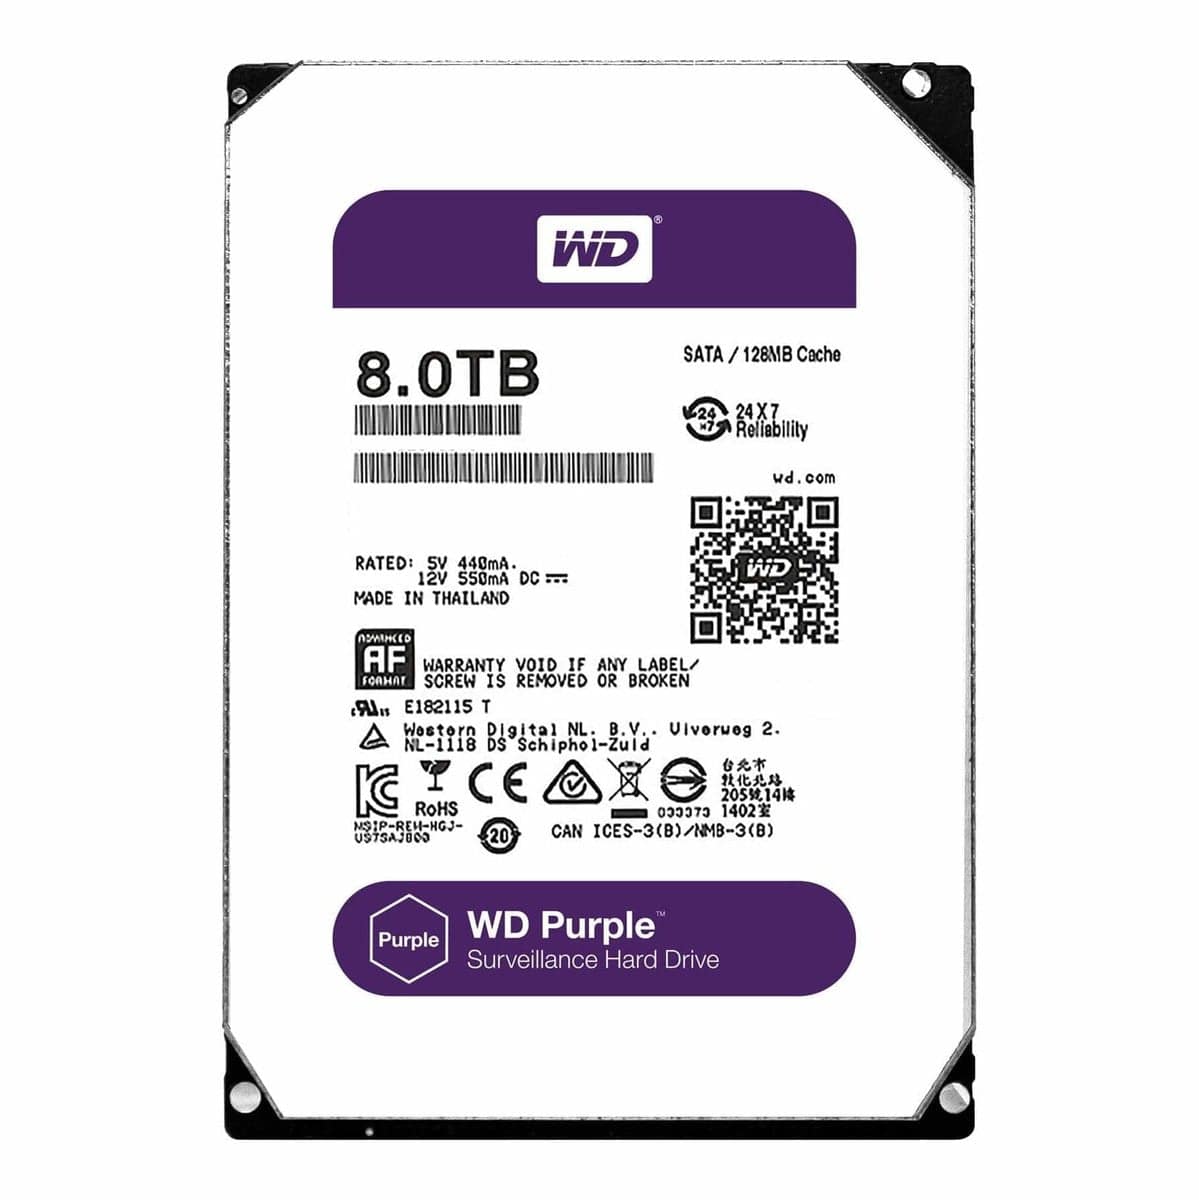 Supply Master Security & Surveillance Systems Western Digital Purple Hard Drive Disk For Security System